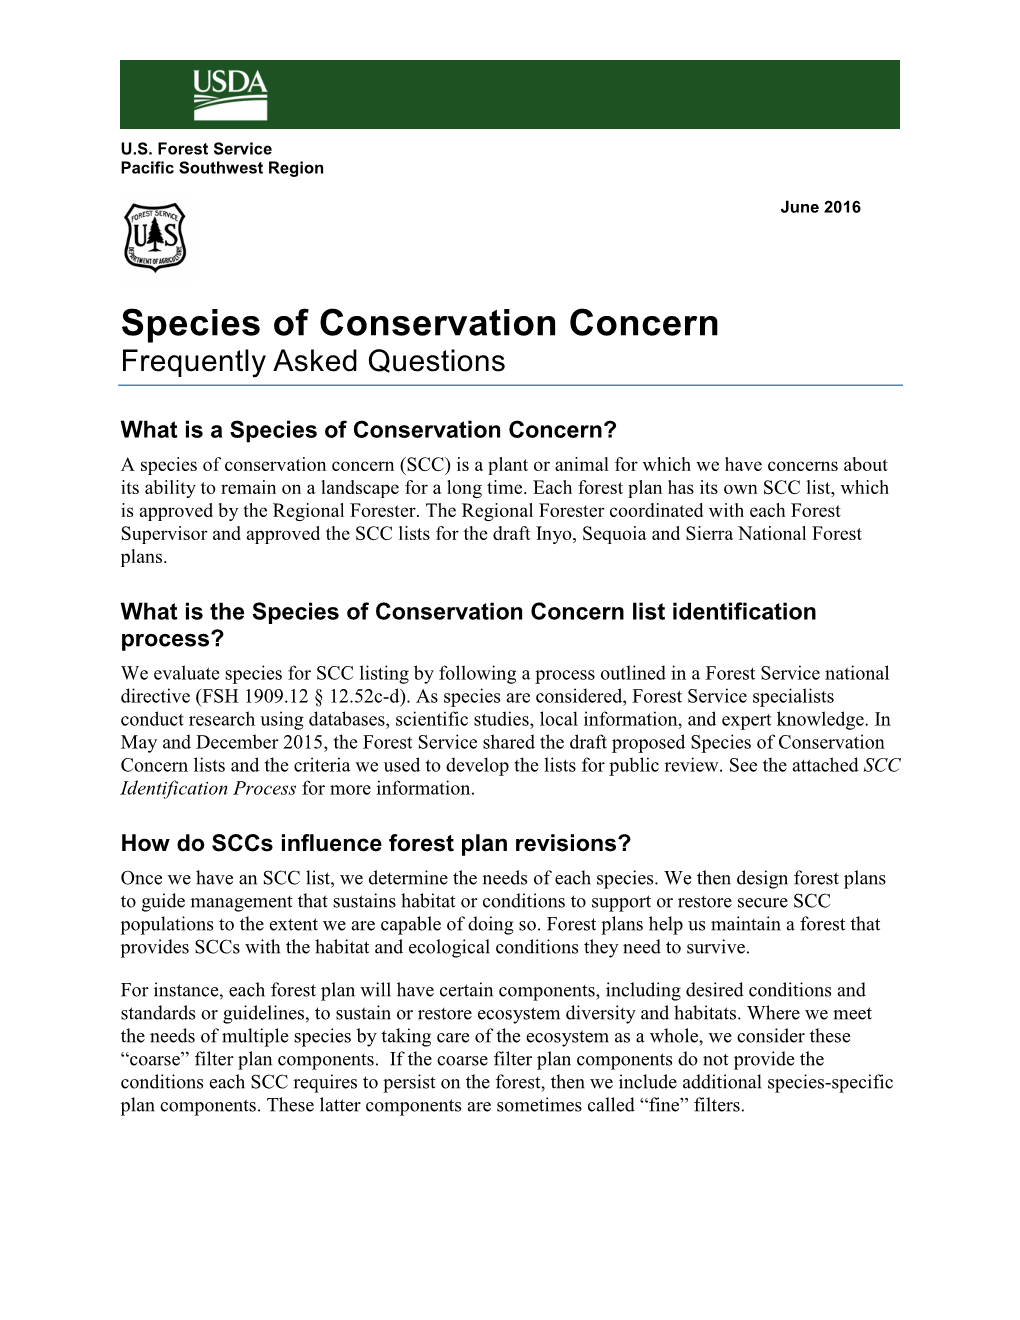 Species of Conservation Concern Frequently Asked Questions